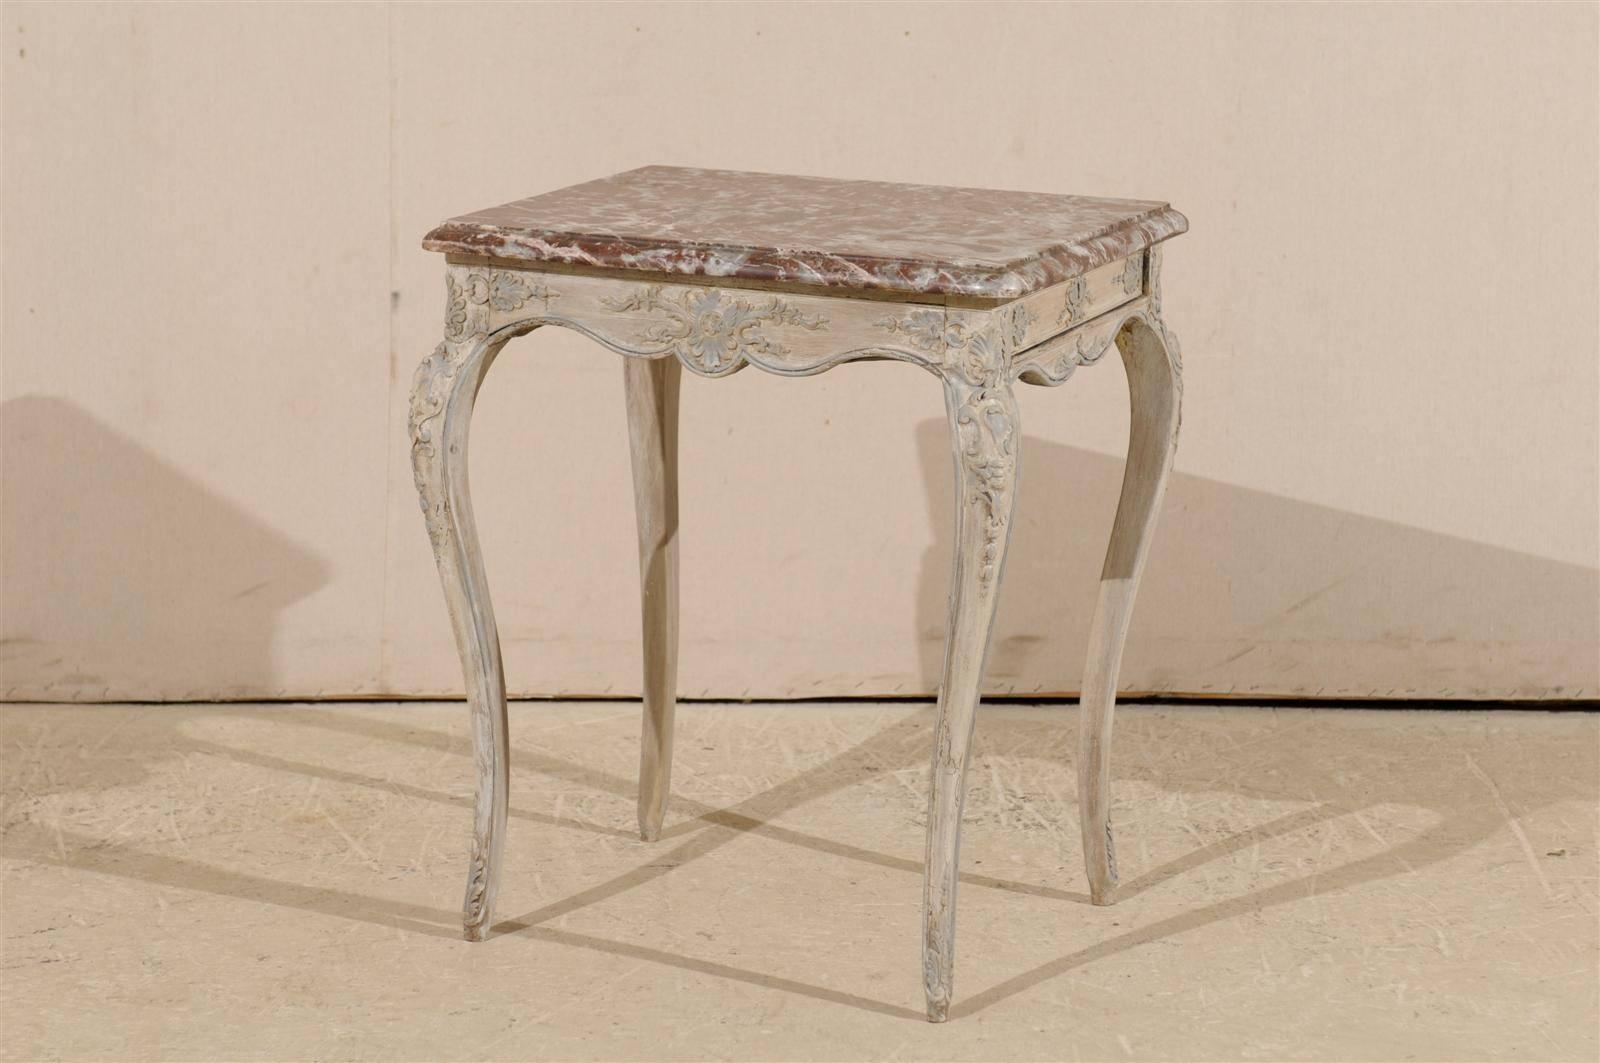 A French early 19th century side table. This elegant French Louis XV Style side table features a red marble top. The scalloped skirt and slender cabriole legs are decorated with floral ornaments. The table has a single drawer located on one of the